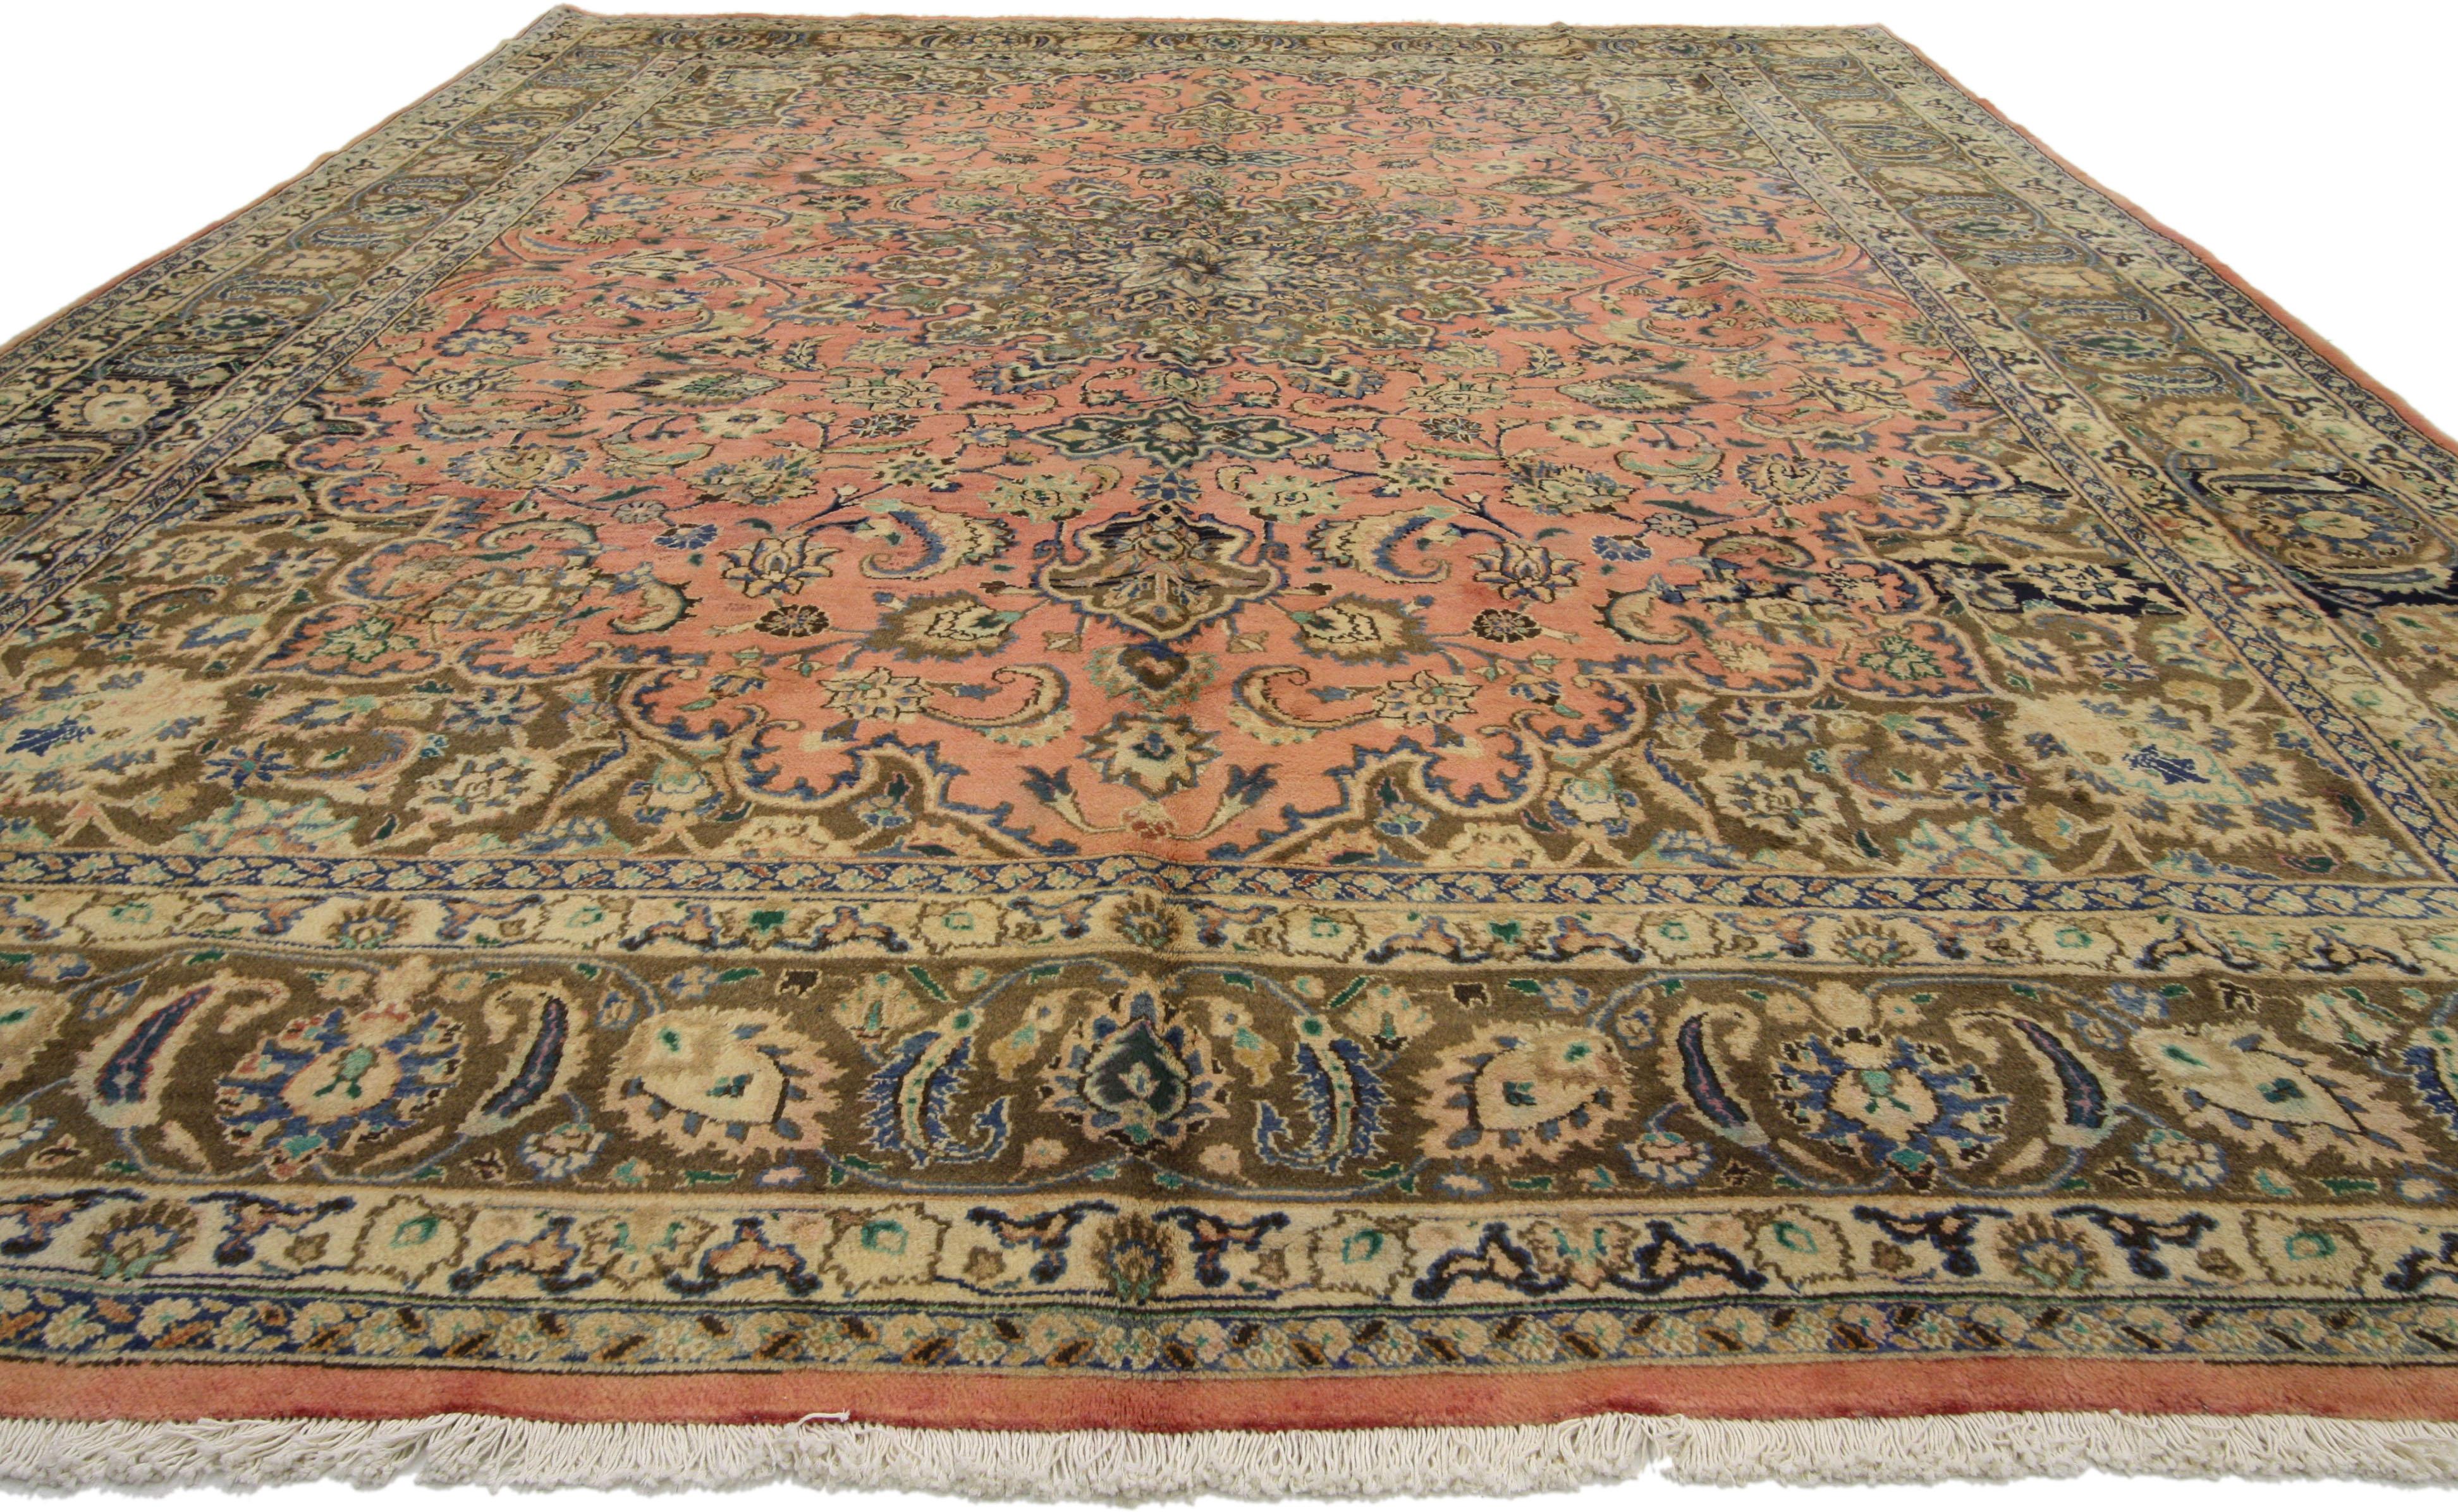 76451, vintage Persian Khorassan Area rug with traditional style. This hand-knotted wool vintage Persian Khorassan rug features a 16-point centre medallion and complementary spandrels with an allover arabesque floral pattern. It is surrounded by a